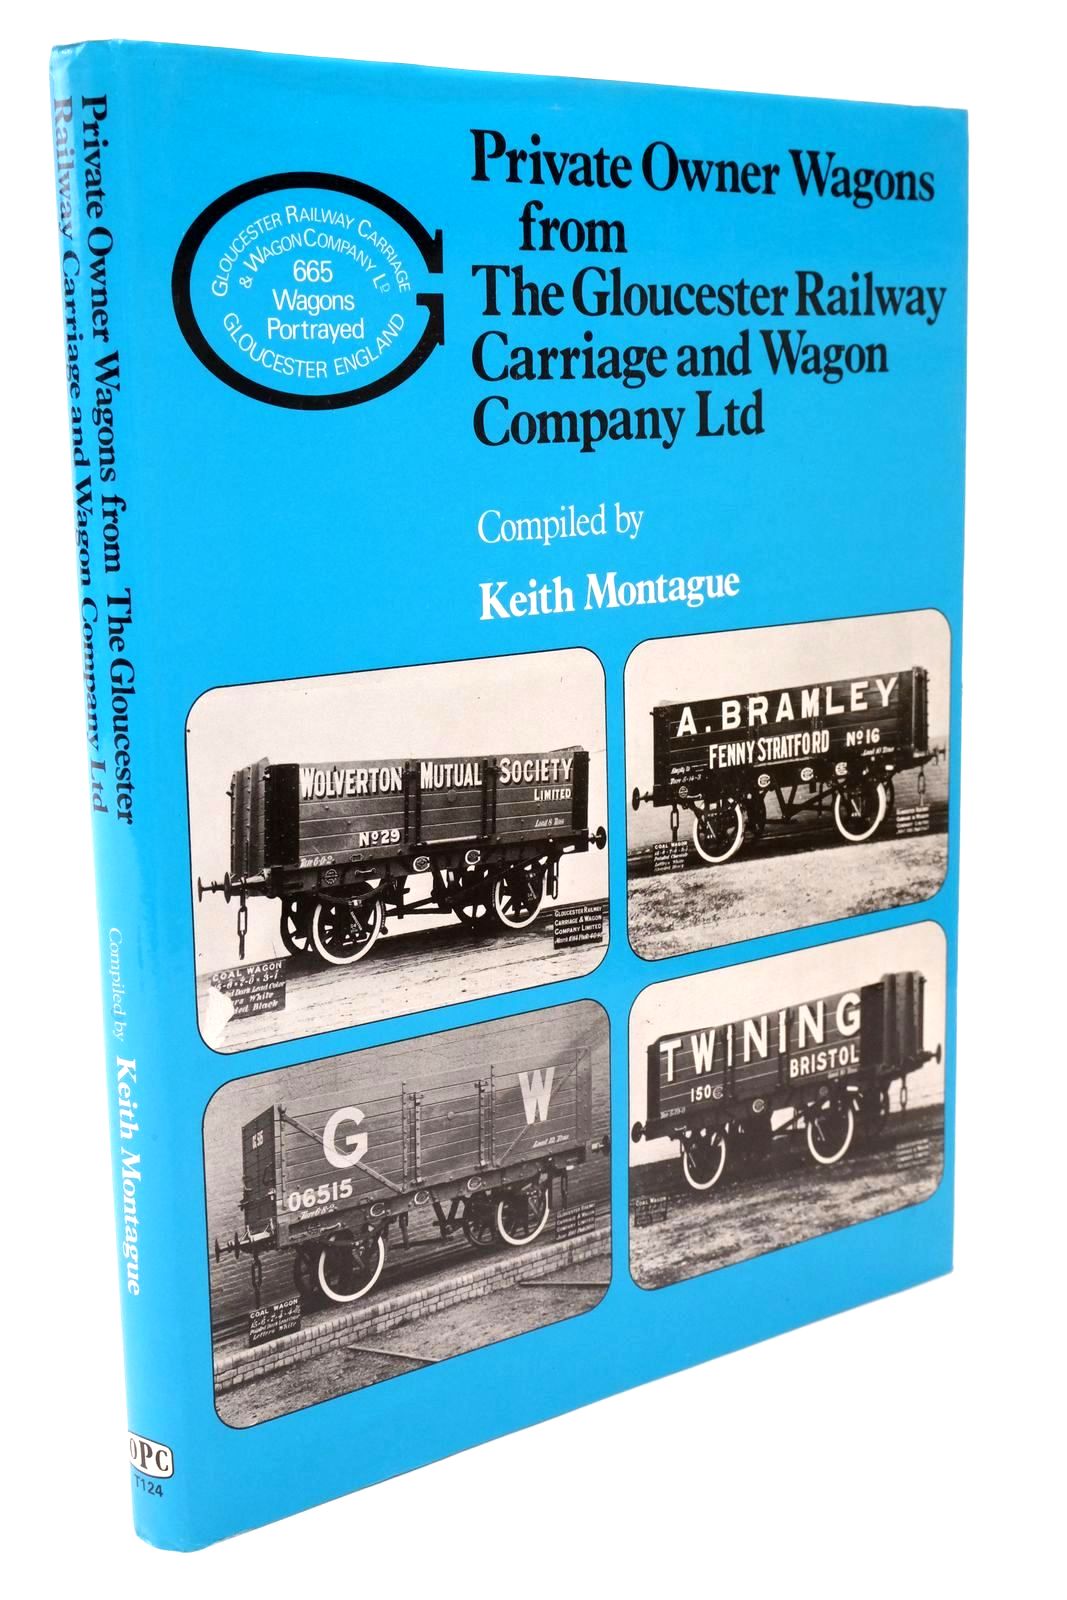 Photo of PRIVATE OWNER WAGONS FROM THE GLOUCESTER RAILWAY CARRIAGE AND WAGON COMPANY LTD written by Montague, Keith published by Oxford Publishing (STOCK CODE: 1322521)  for sale by Stella & Rose's Books